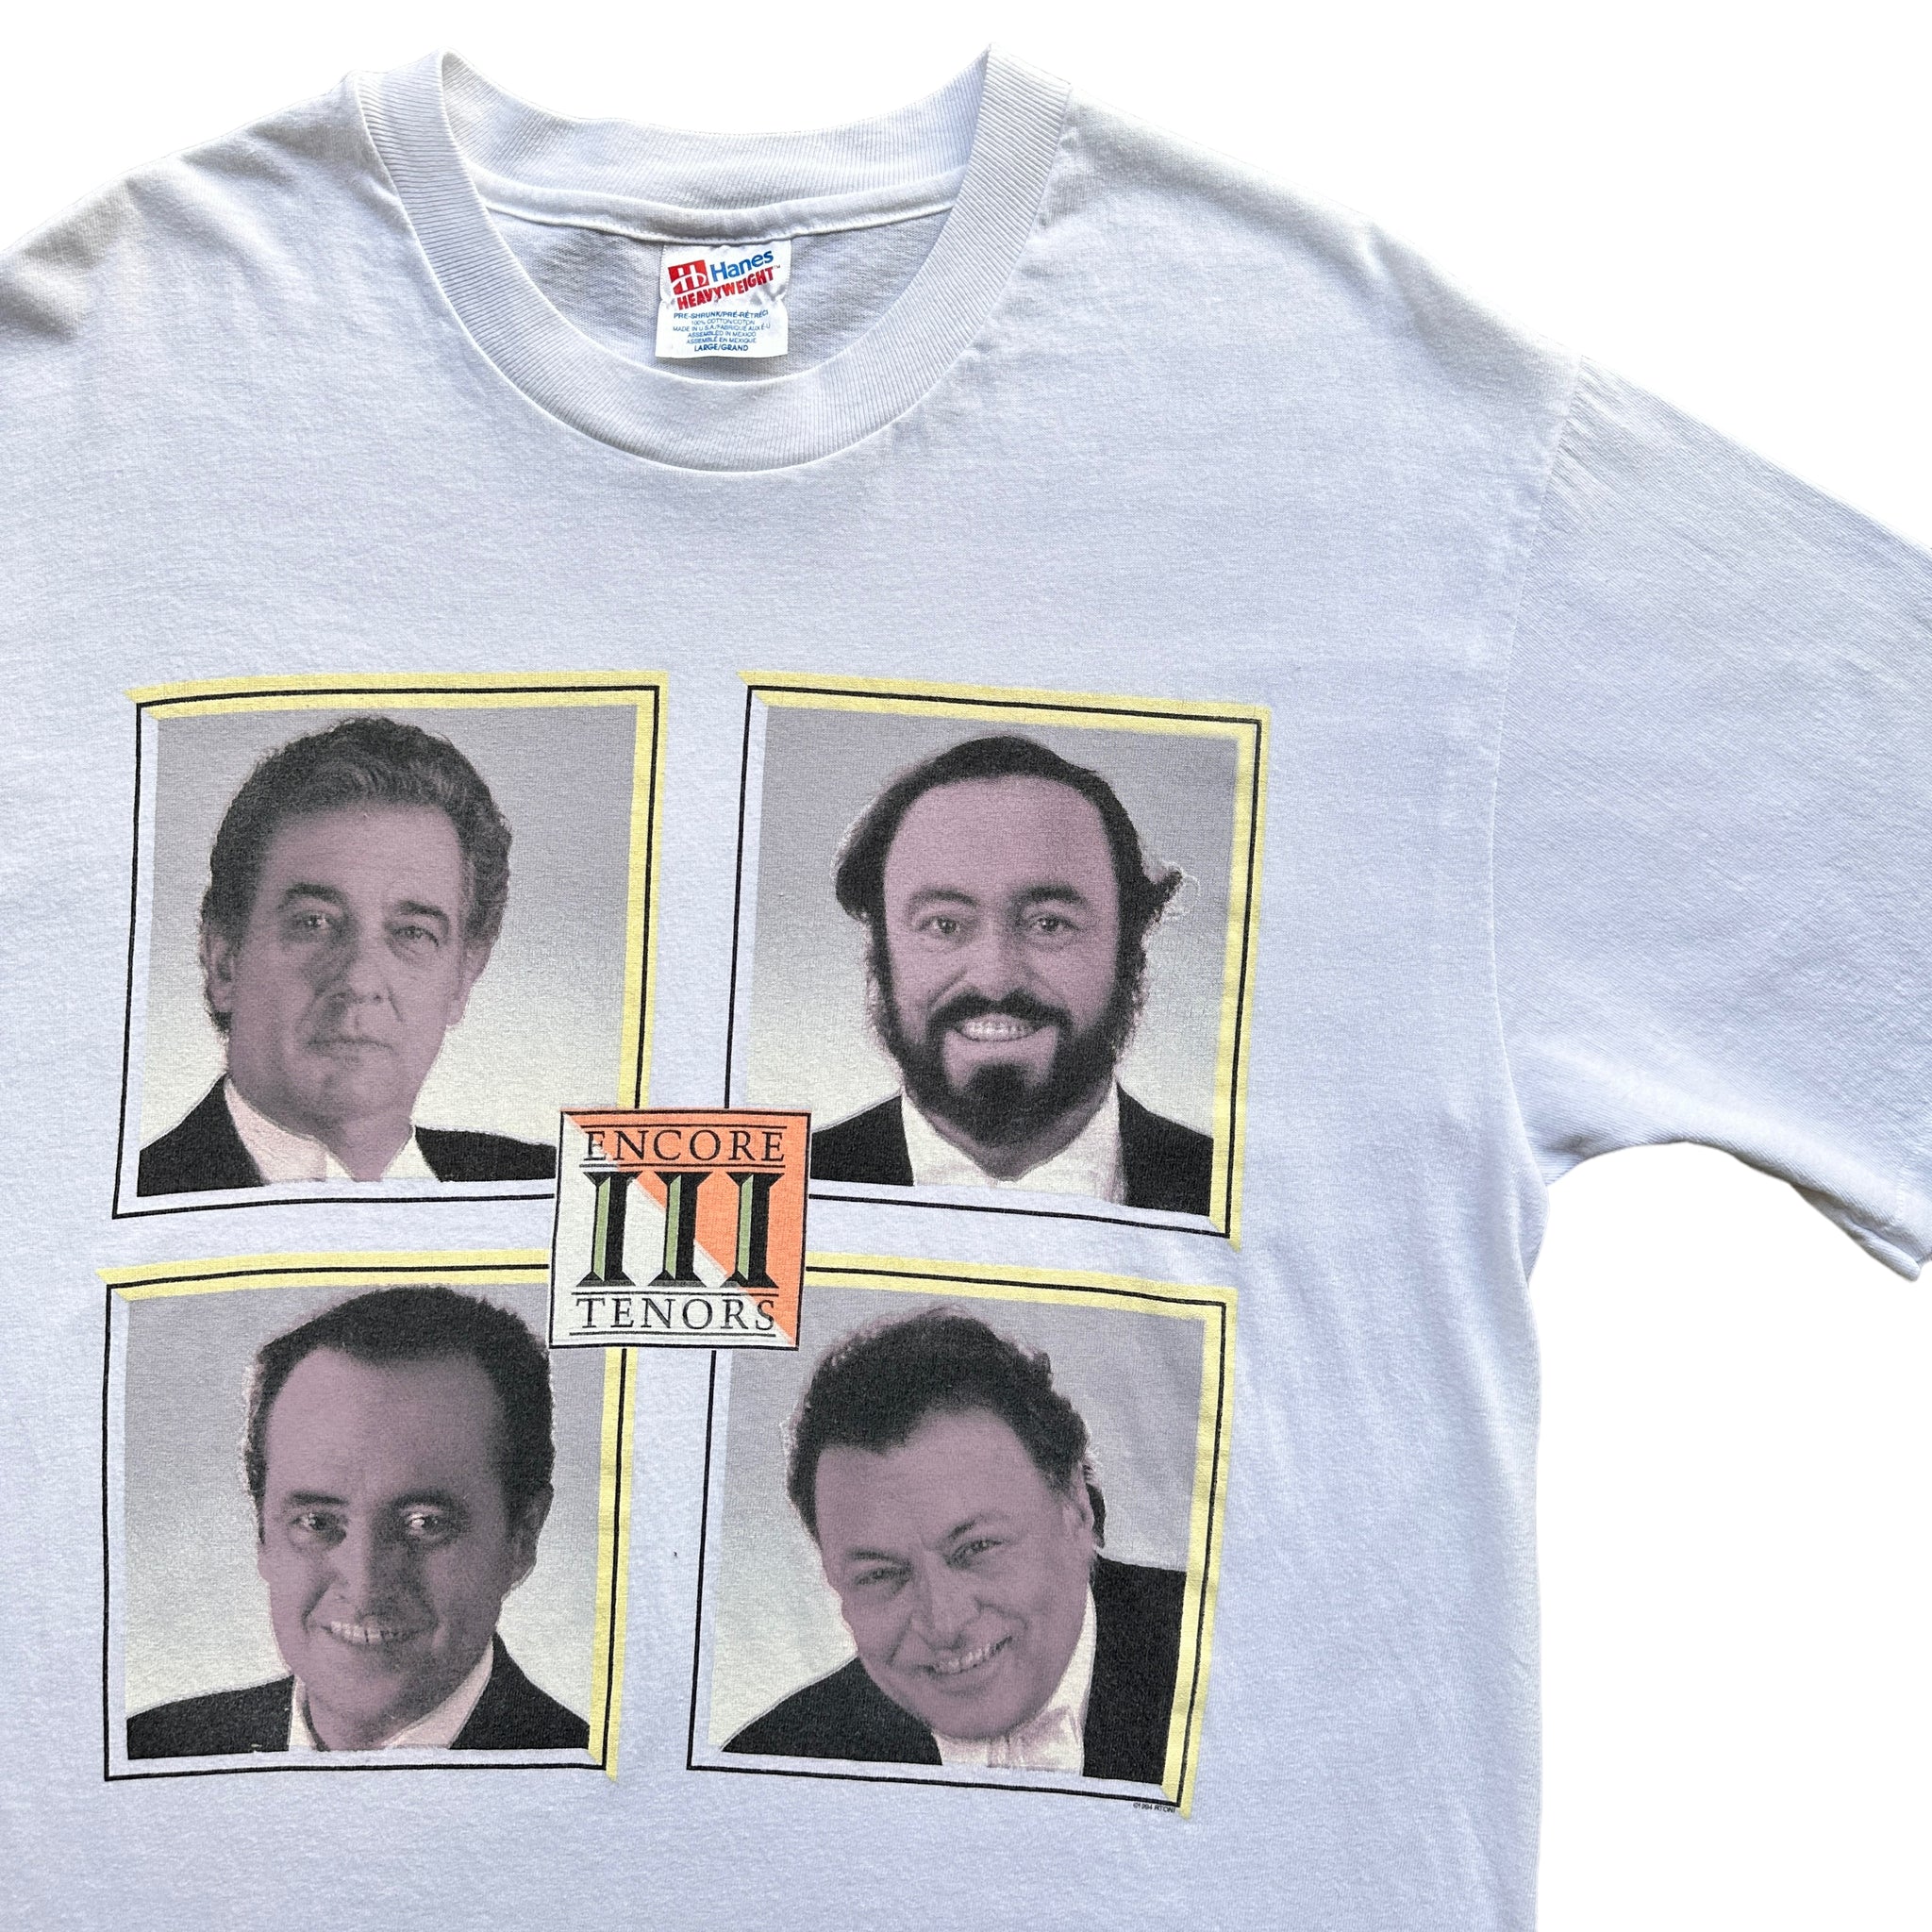 90s 3 Tenors tee pavarotti and the other guy large